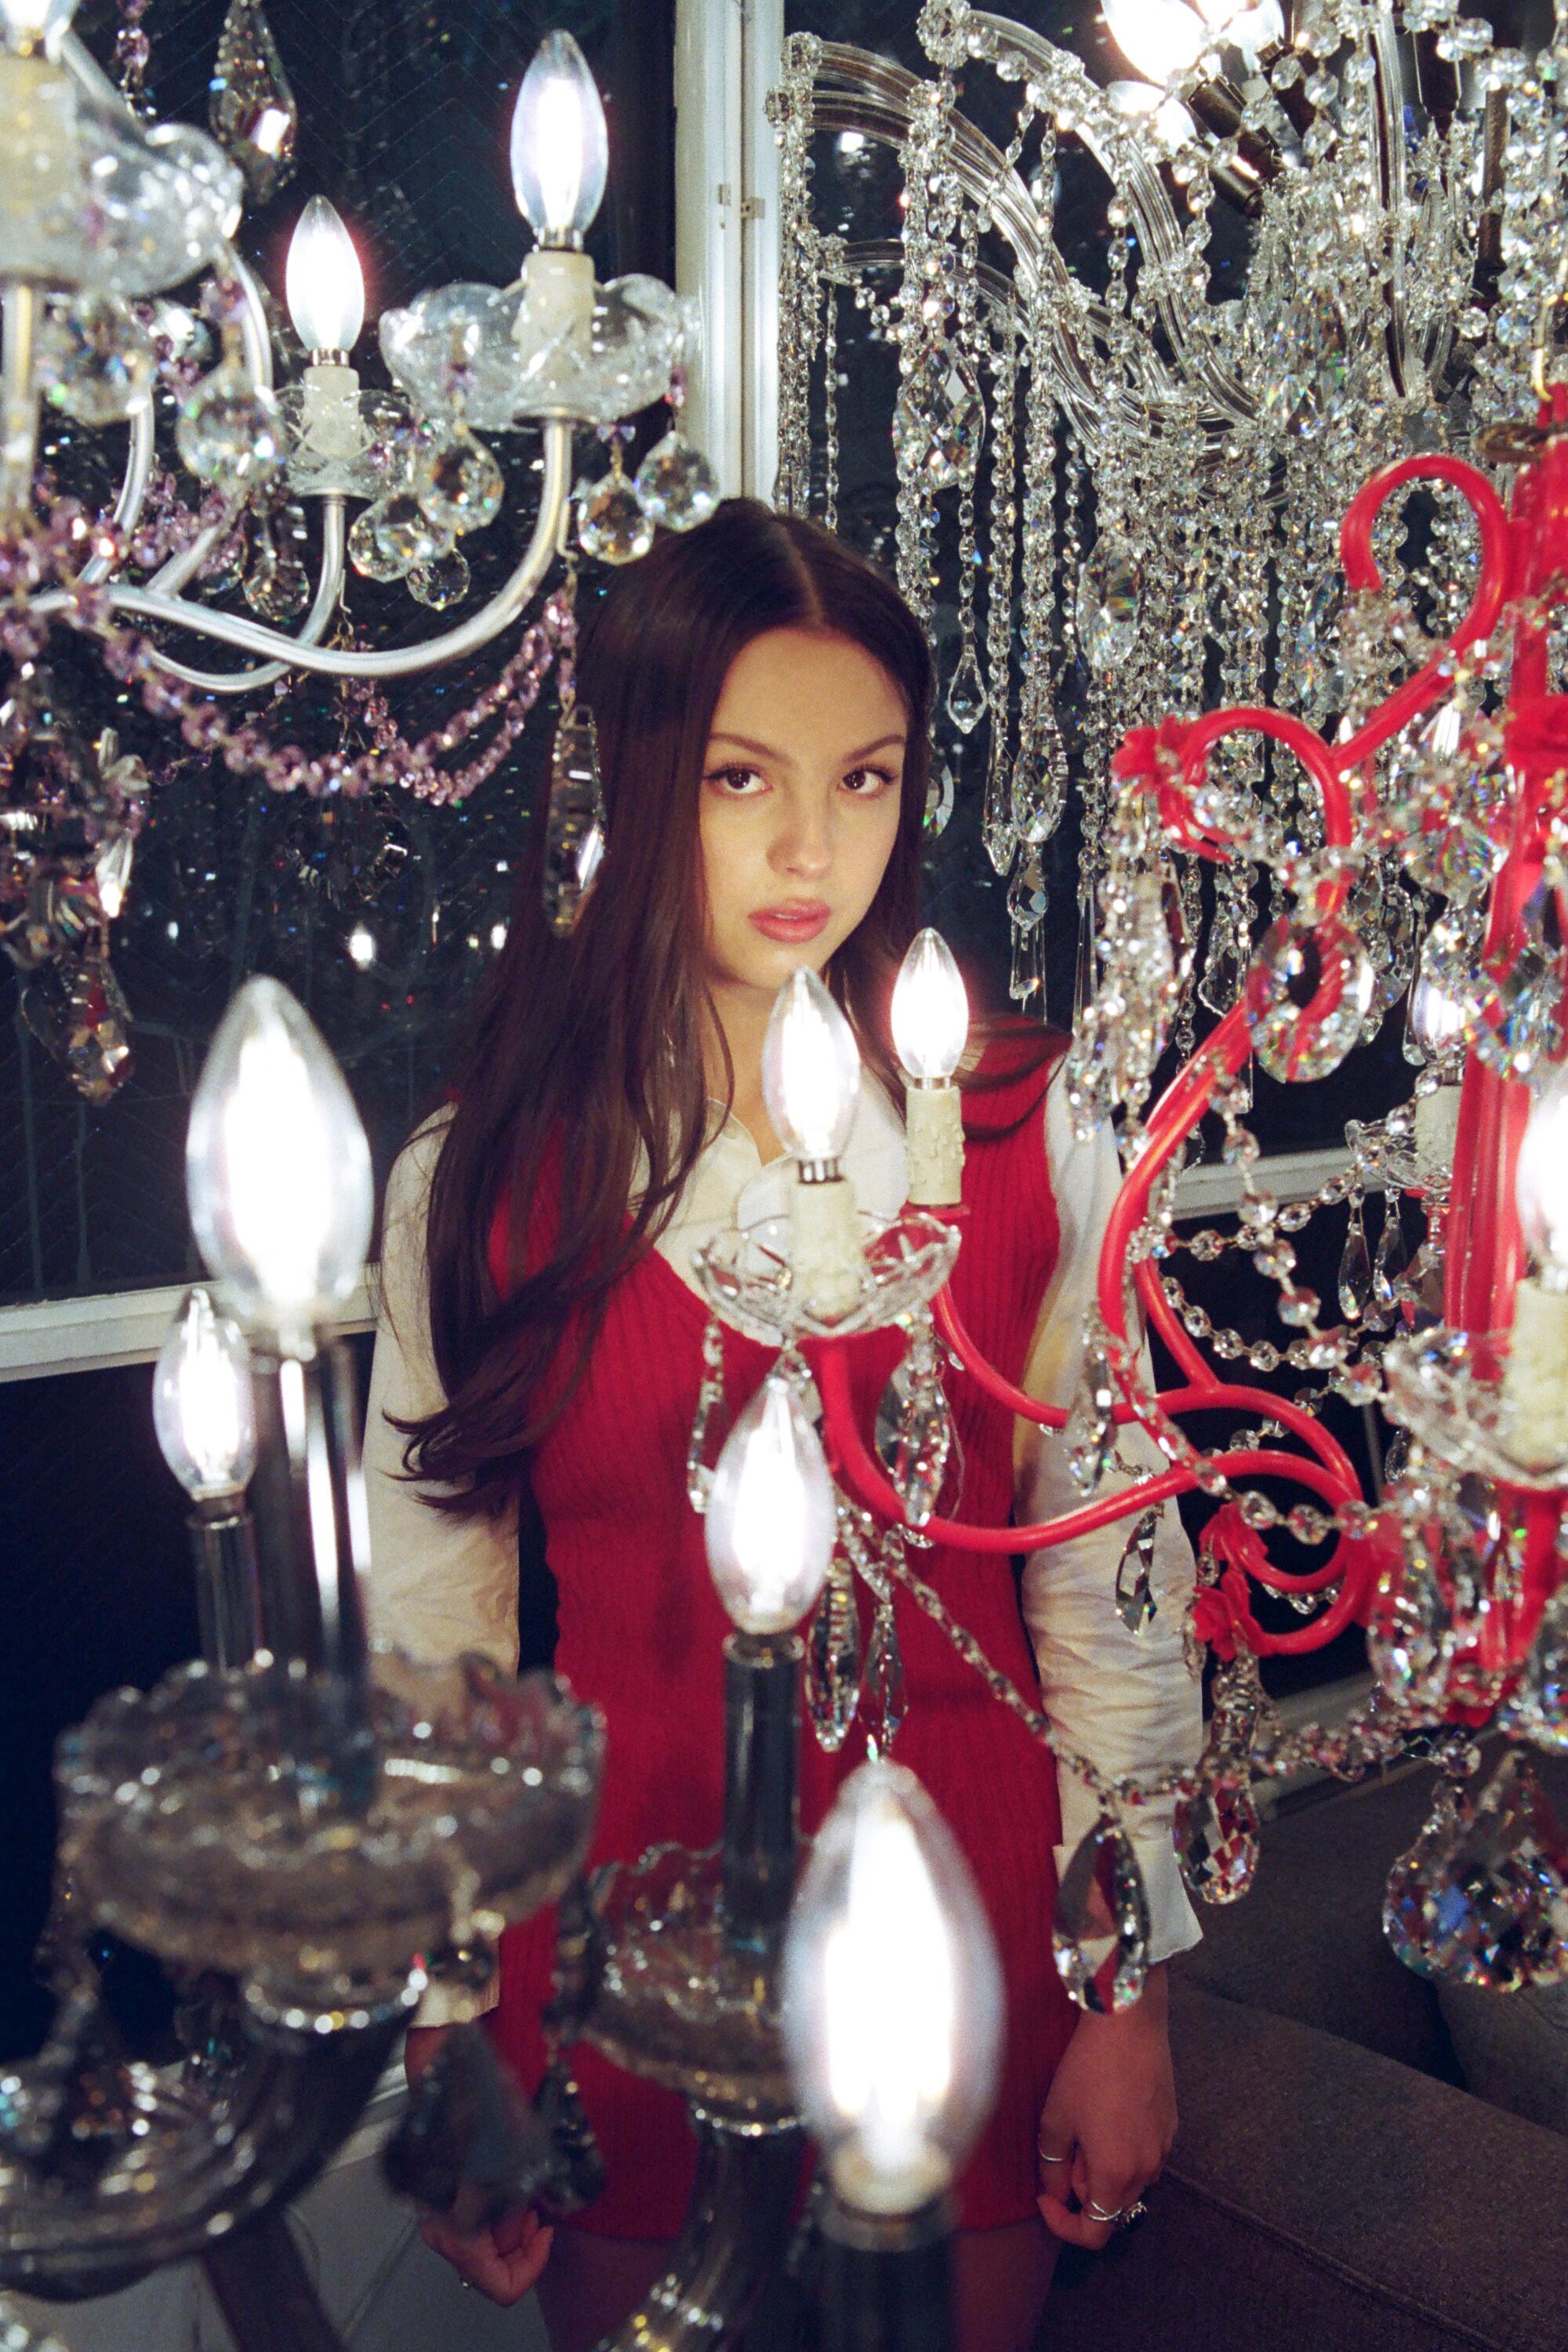 Olivia Rodrigo stands by chandeliers at George's Lighting Plus on Hollywood Blvd.